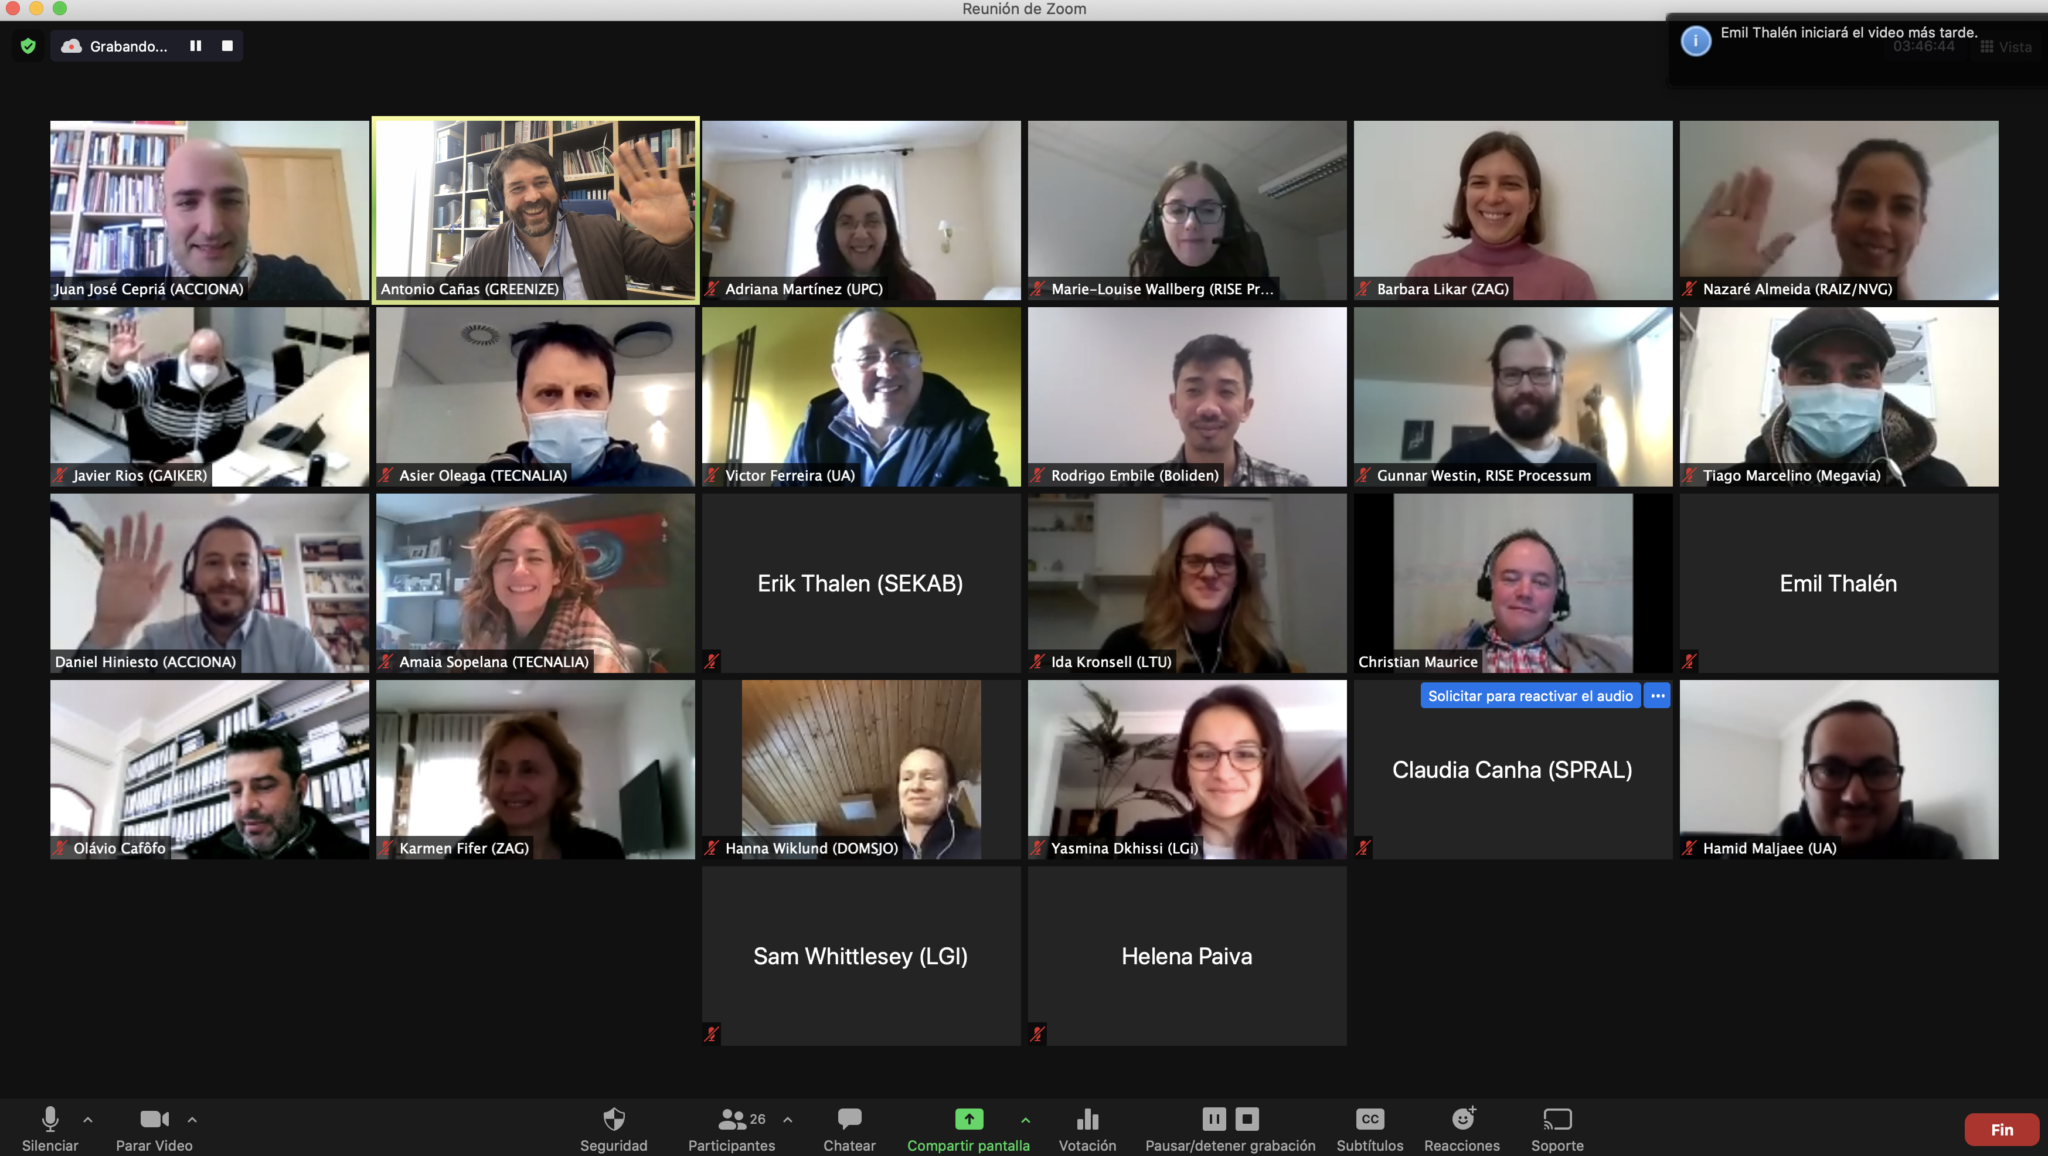 7th GENERAL ASSEMBLY OF THE PAPERCHAIN PROJECT – VIRTUAL MEETING